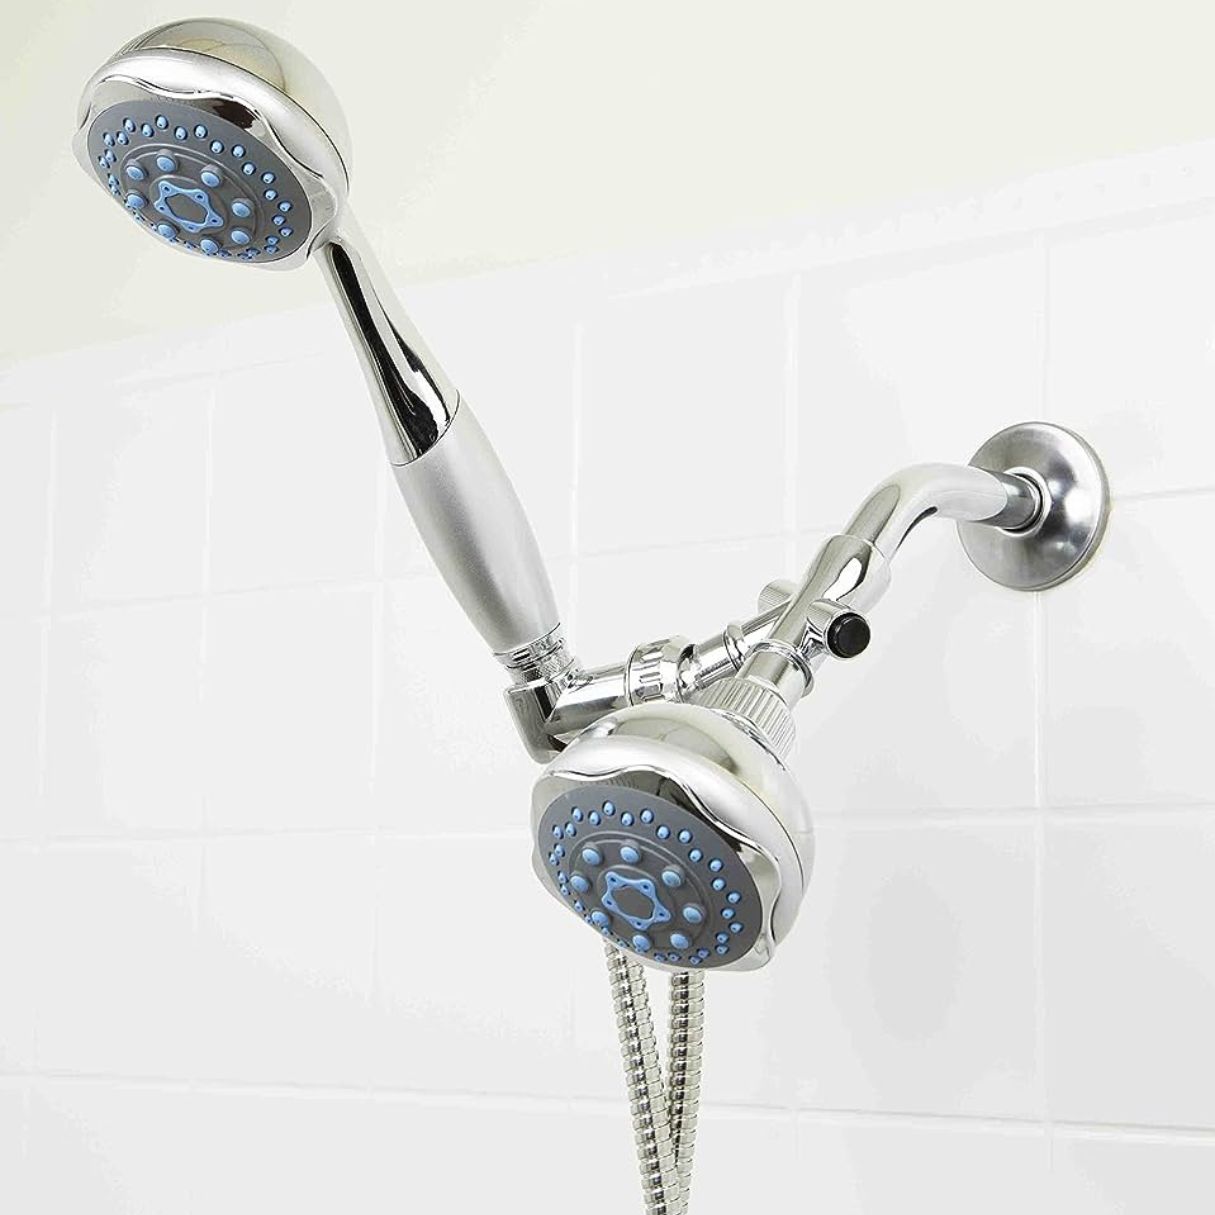 How To Install A Sunbeam Deluxe Twin Showerhead